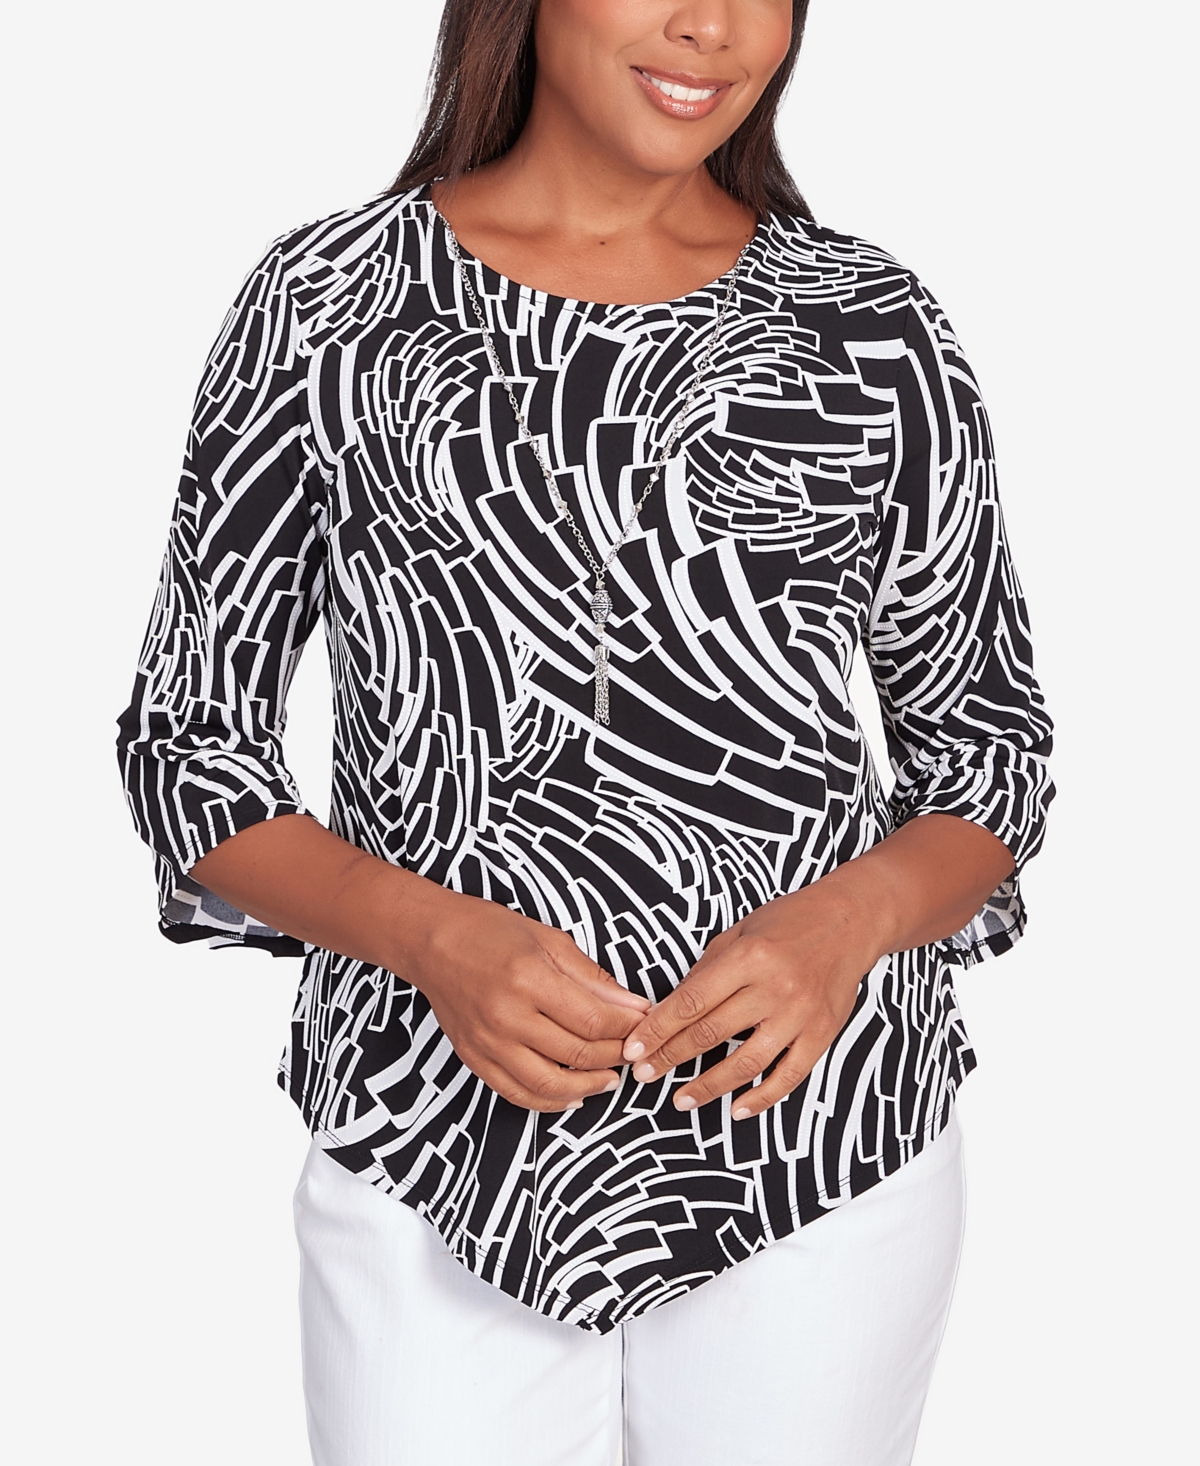 ALFRED DUNNER PETITE CLASSIC PUFF PRINT GEOMETRIC WAVES TOP WITH NECKLACE